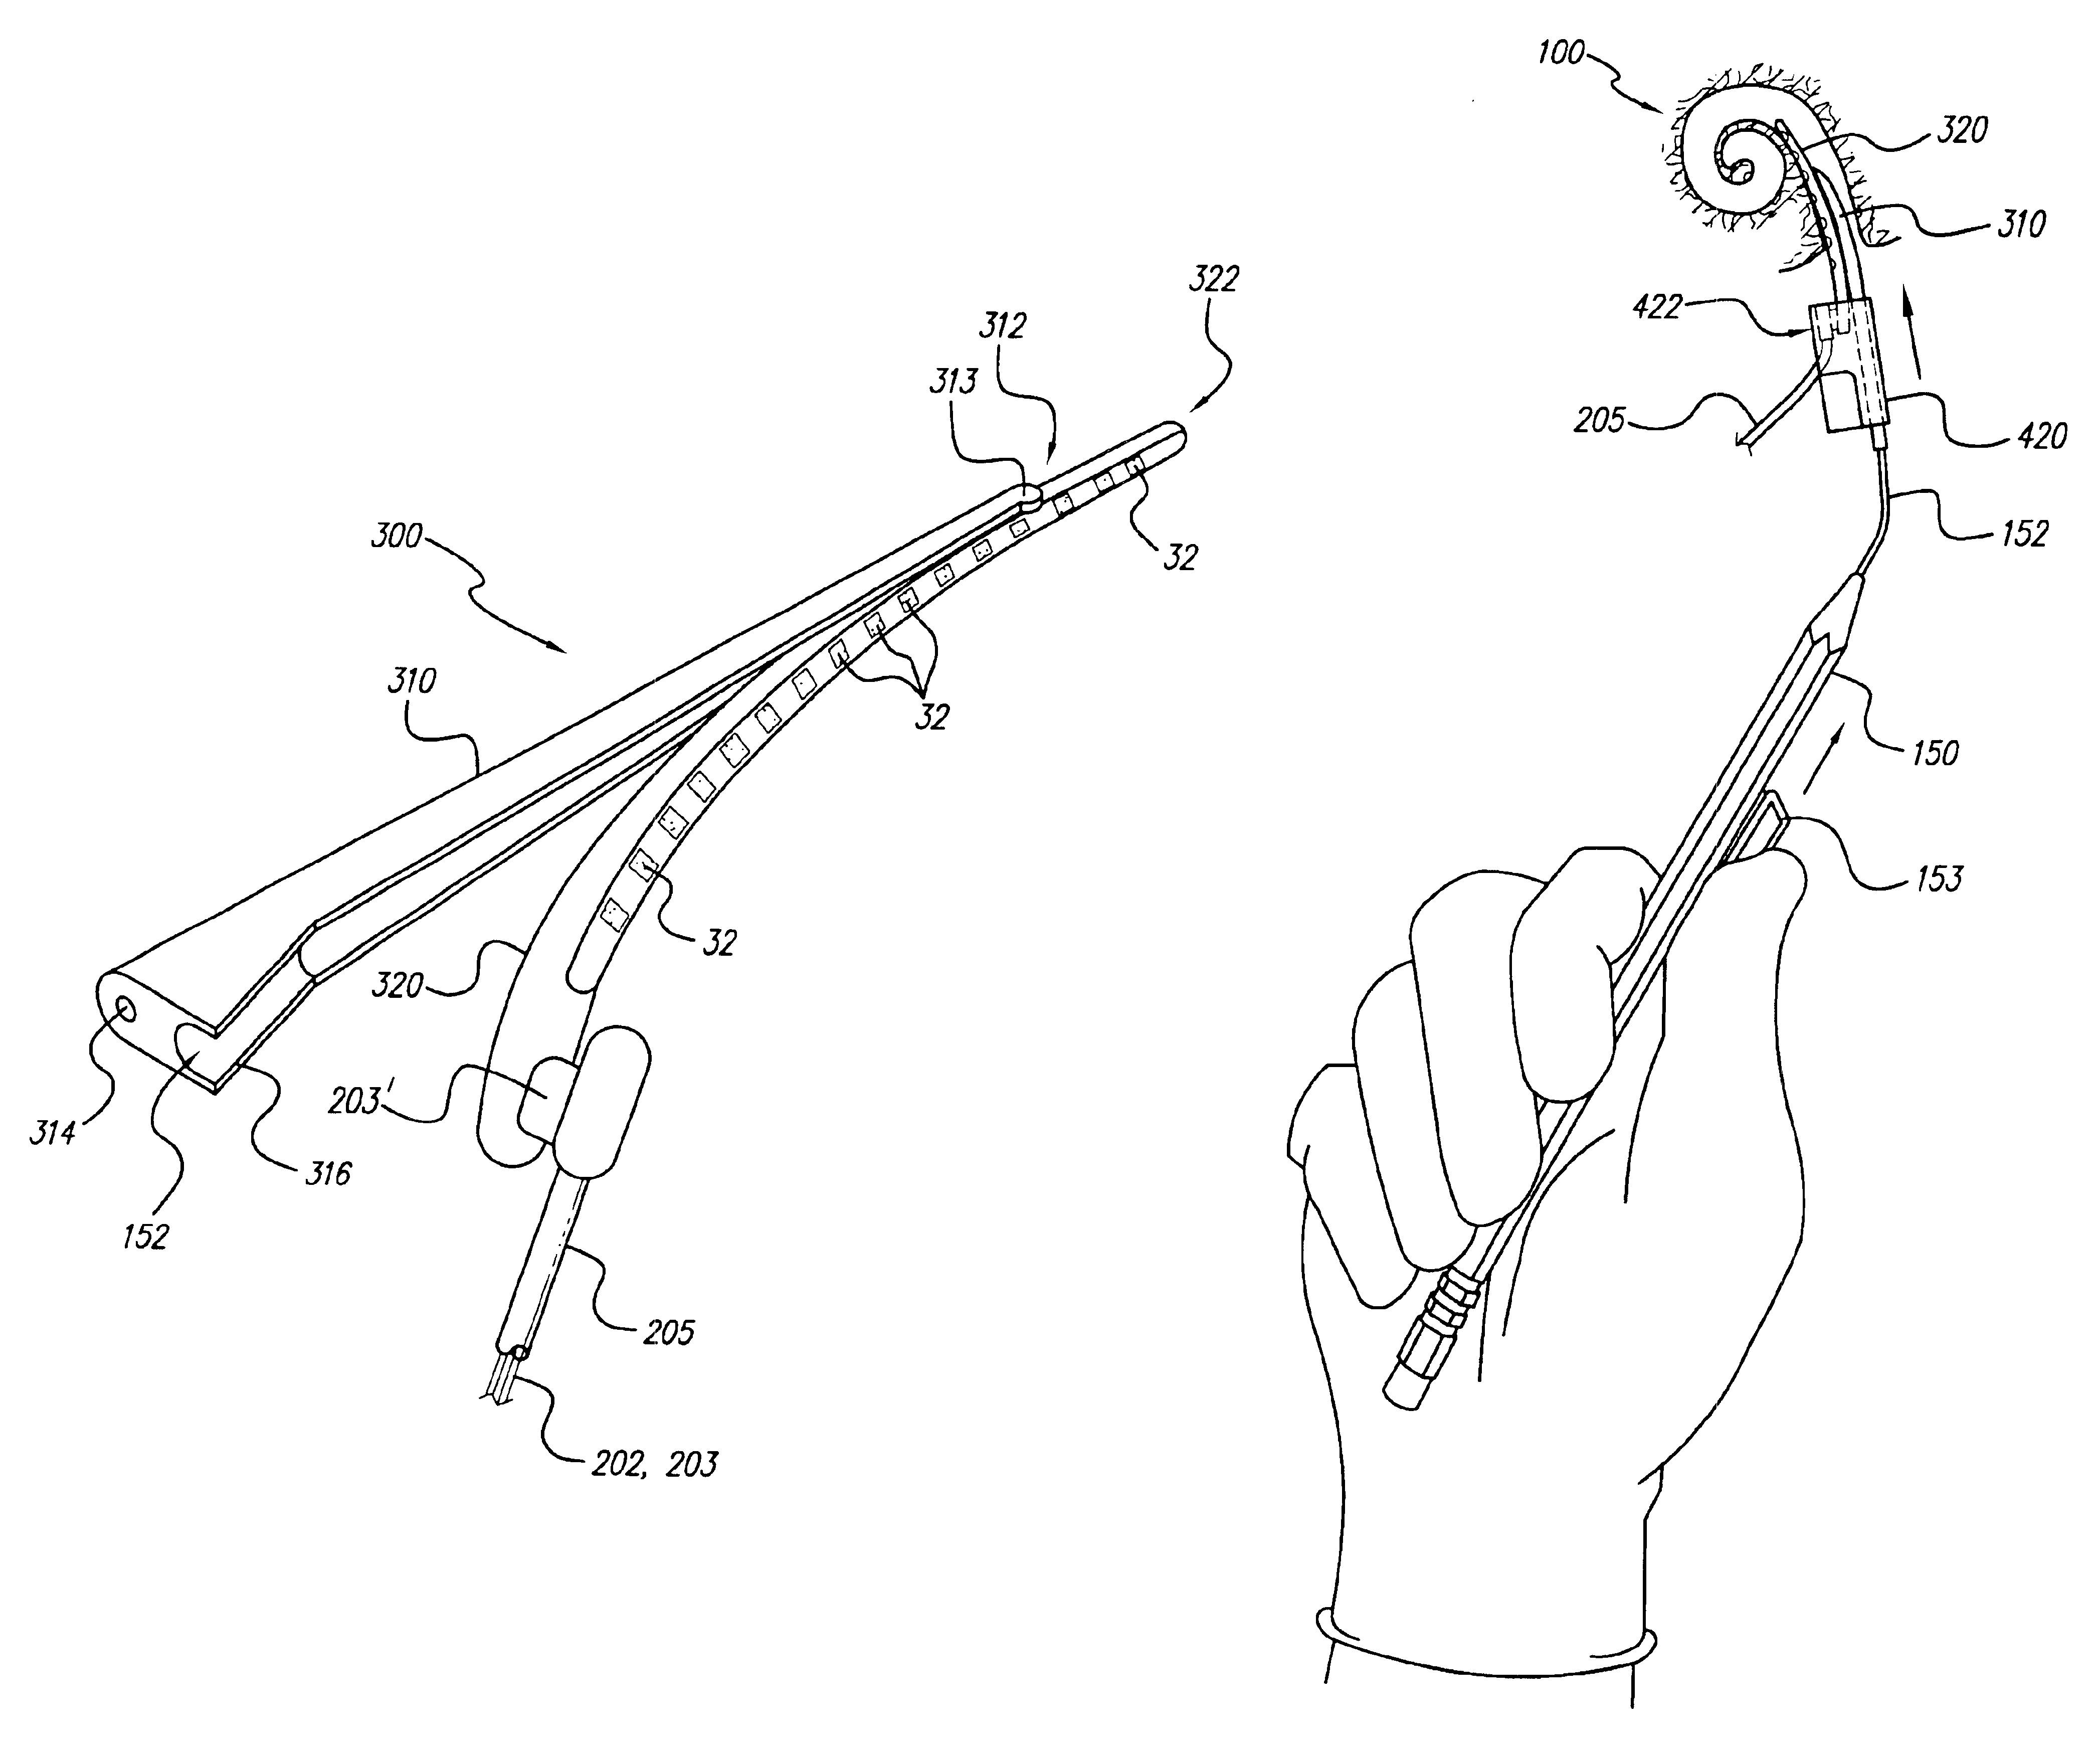 Method for inserting cochlear electrode and insertion tool for use therewith